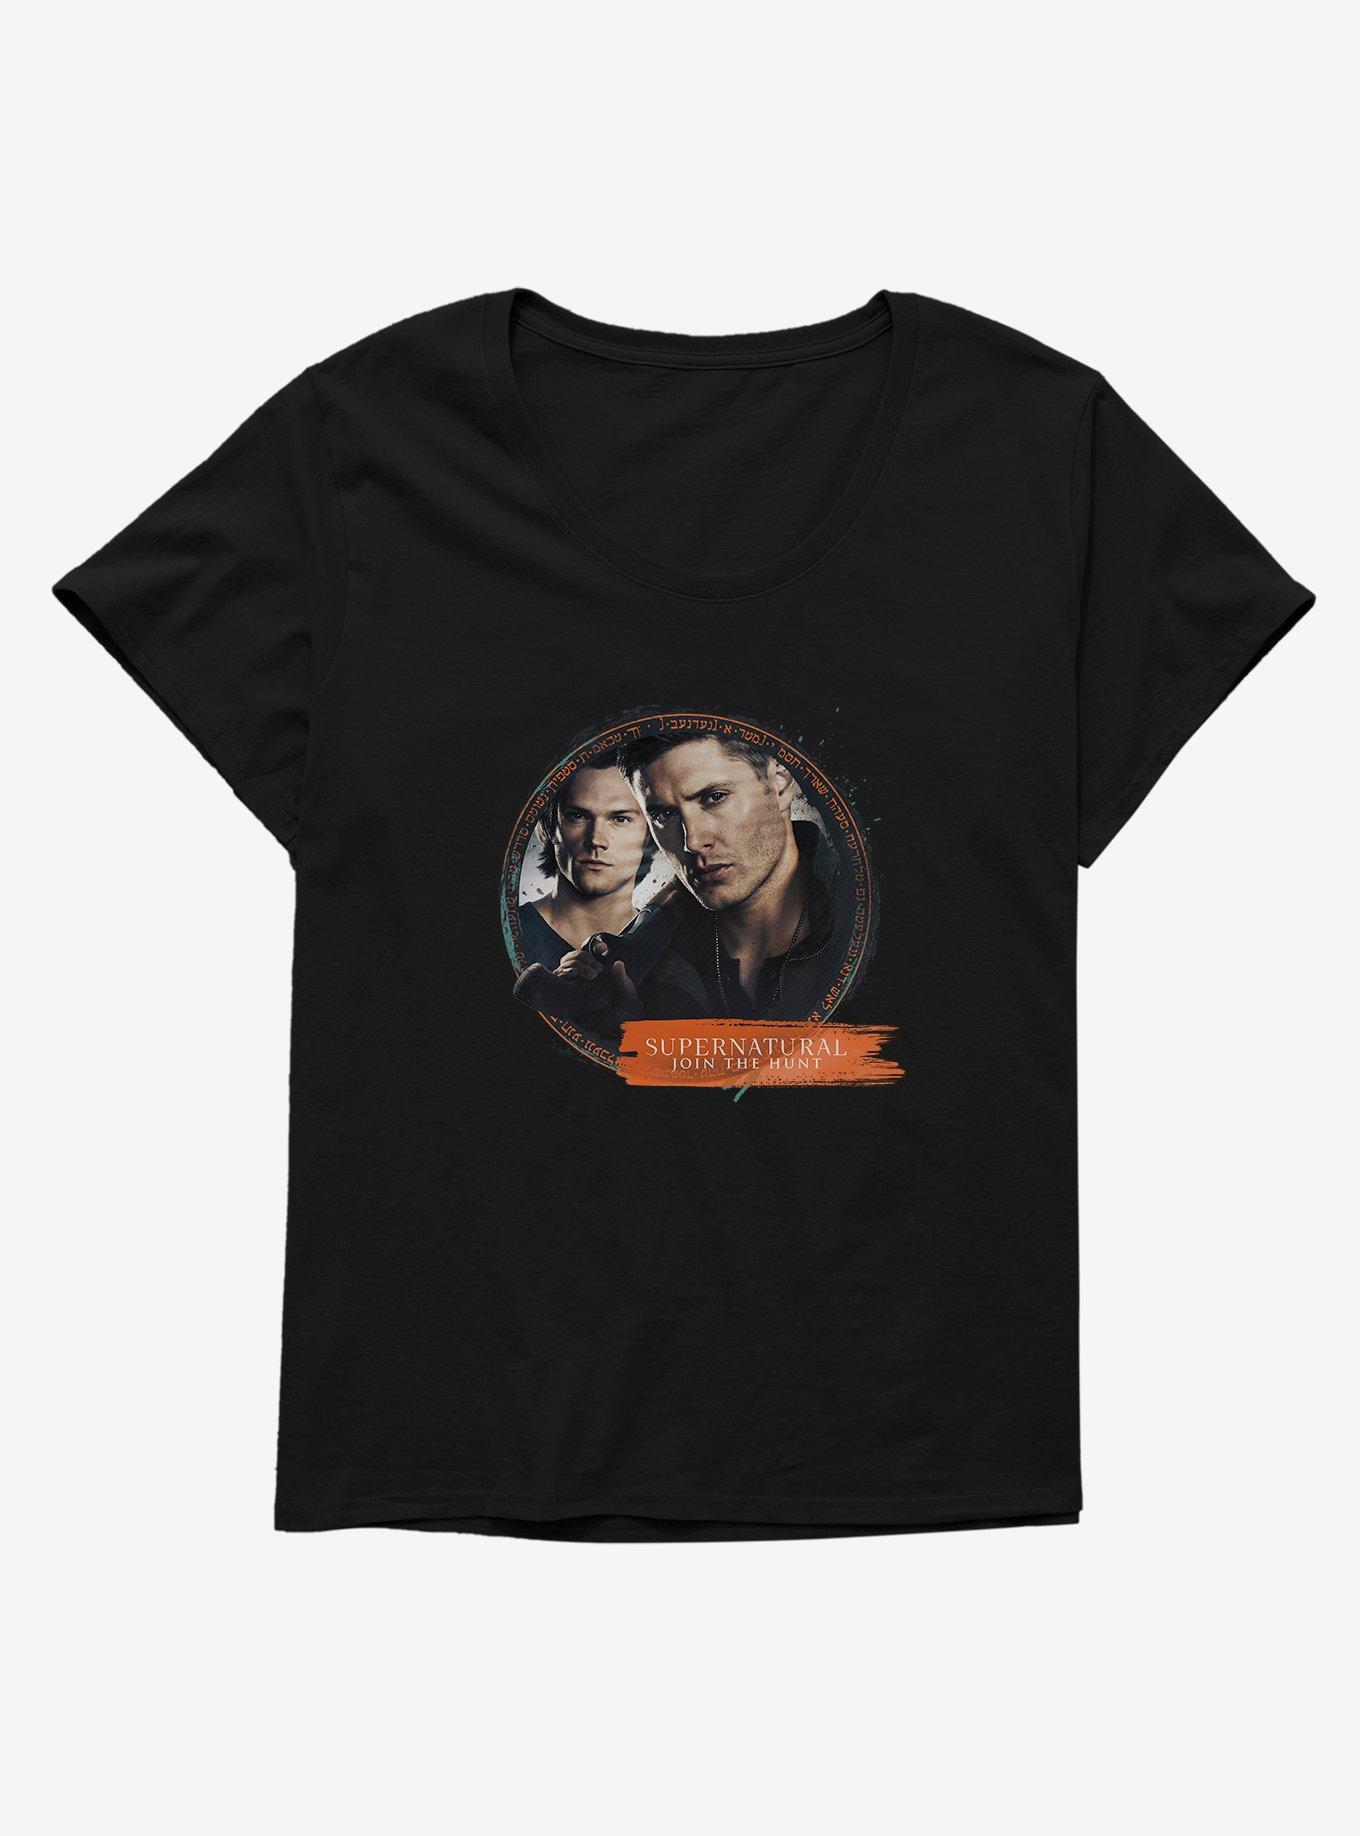 Supernatural Sam And Dean Join The Hunt Girls T-Shirt Plus